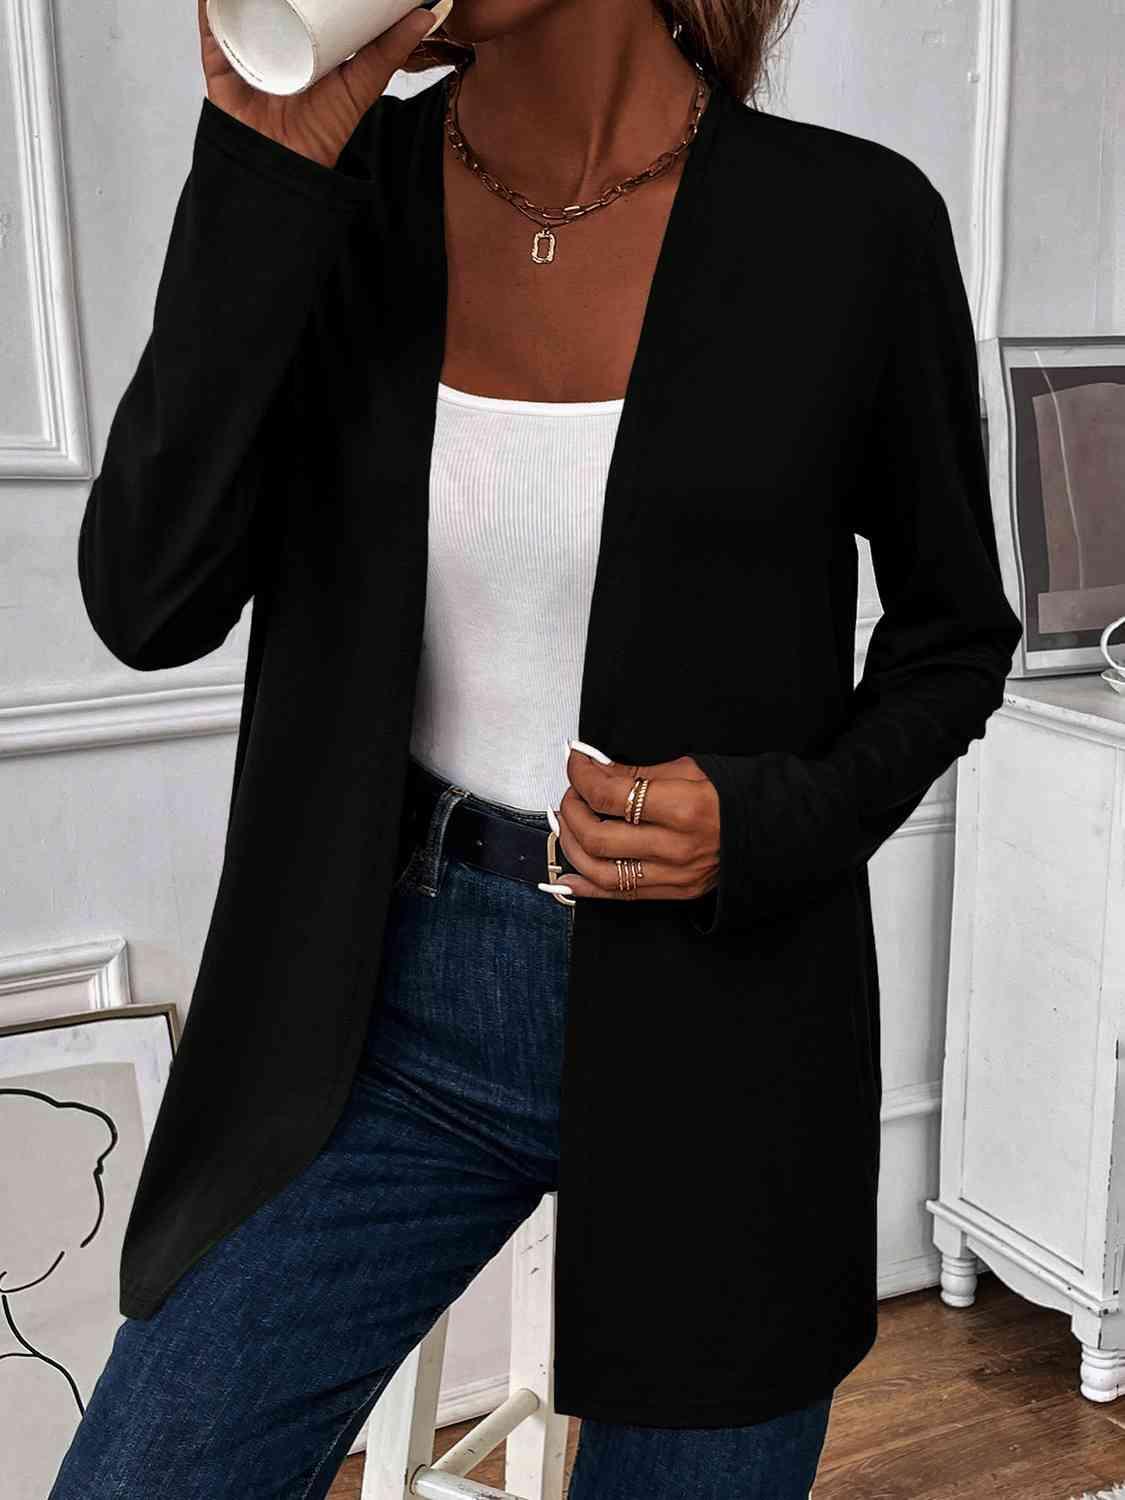 a woman drinking from a cup while wearing a black cardigan